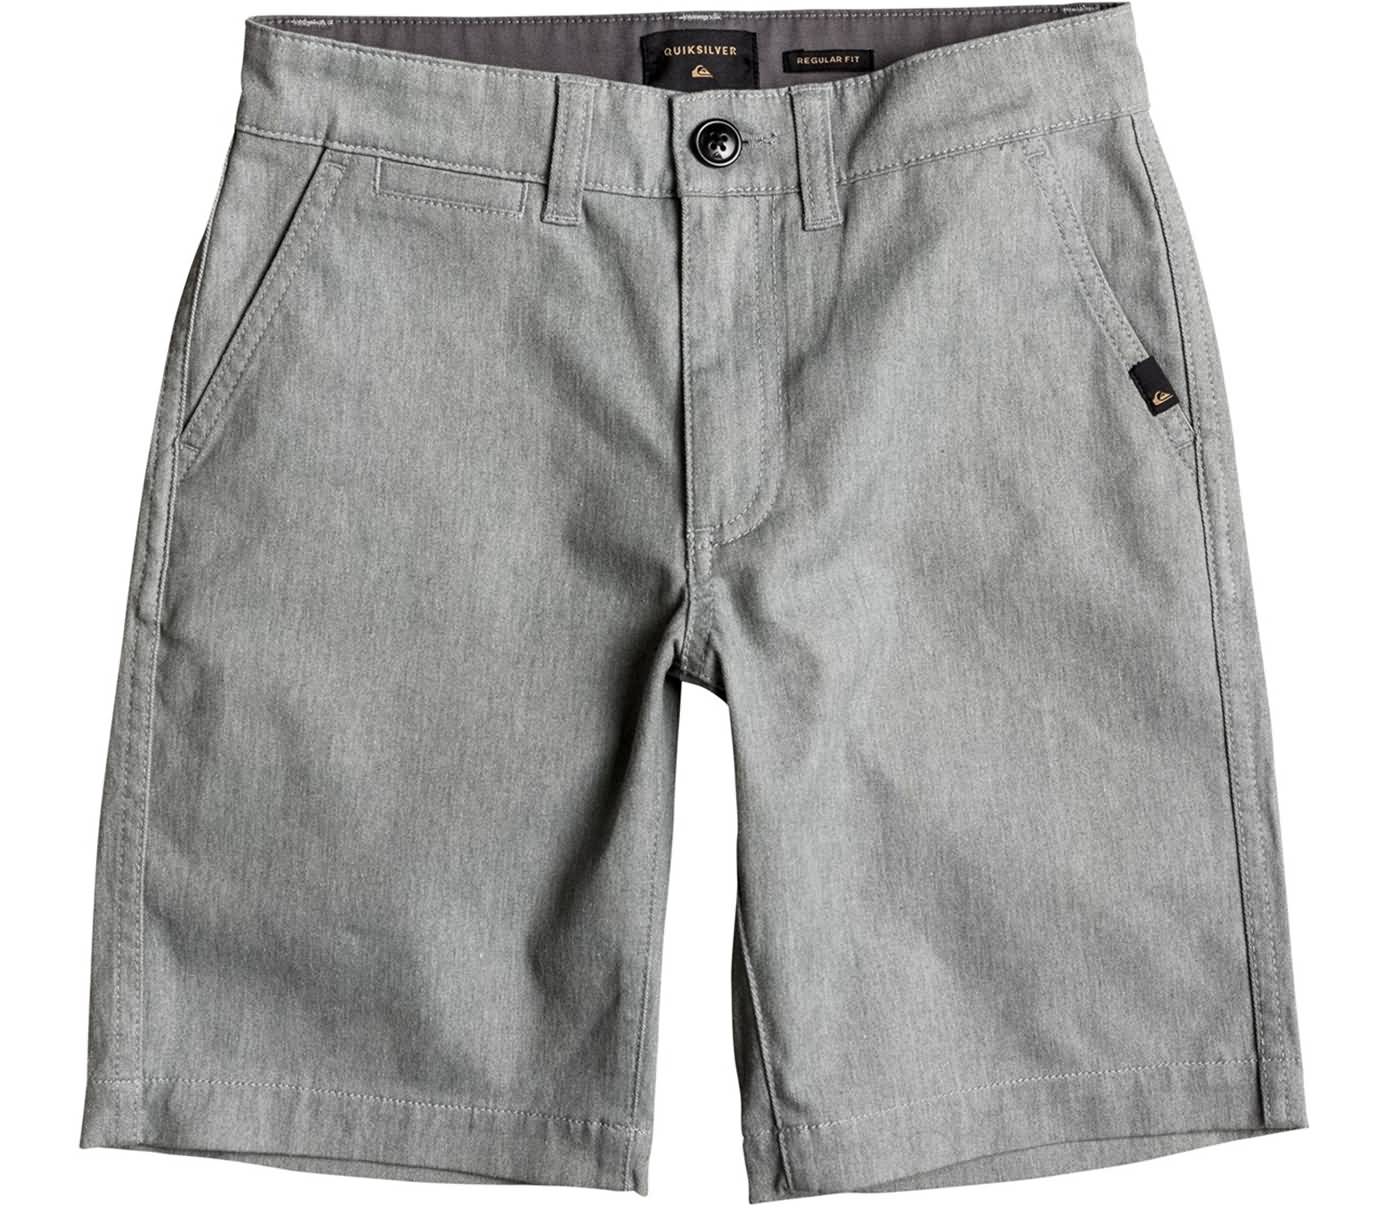 Quiksilver Surf Fall 2017 Youth Boys Lifestyle Walkshorts Preview